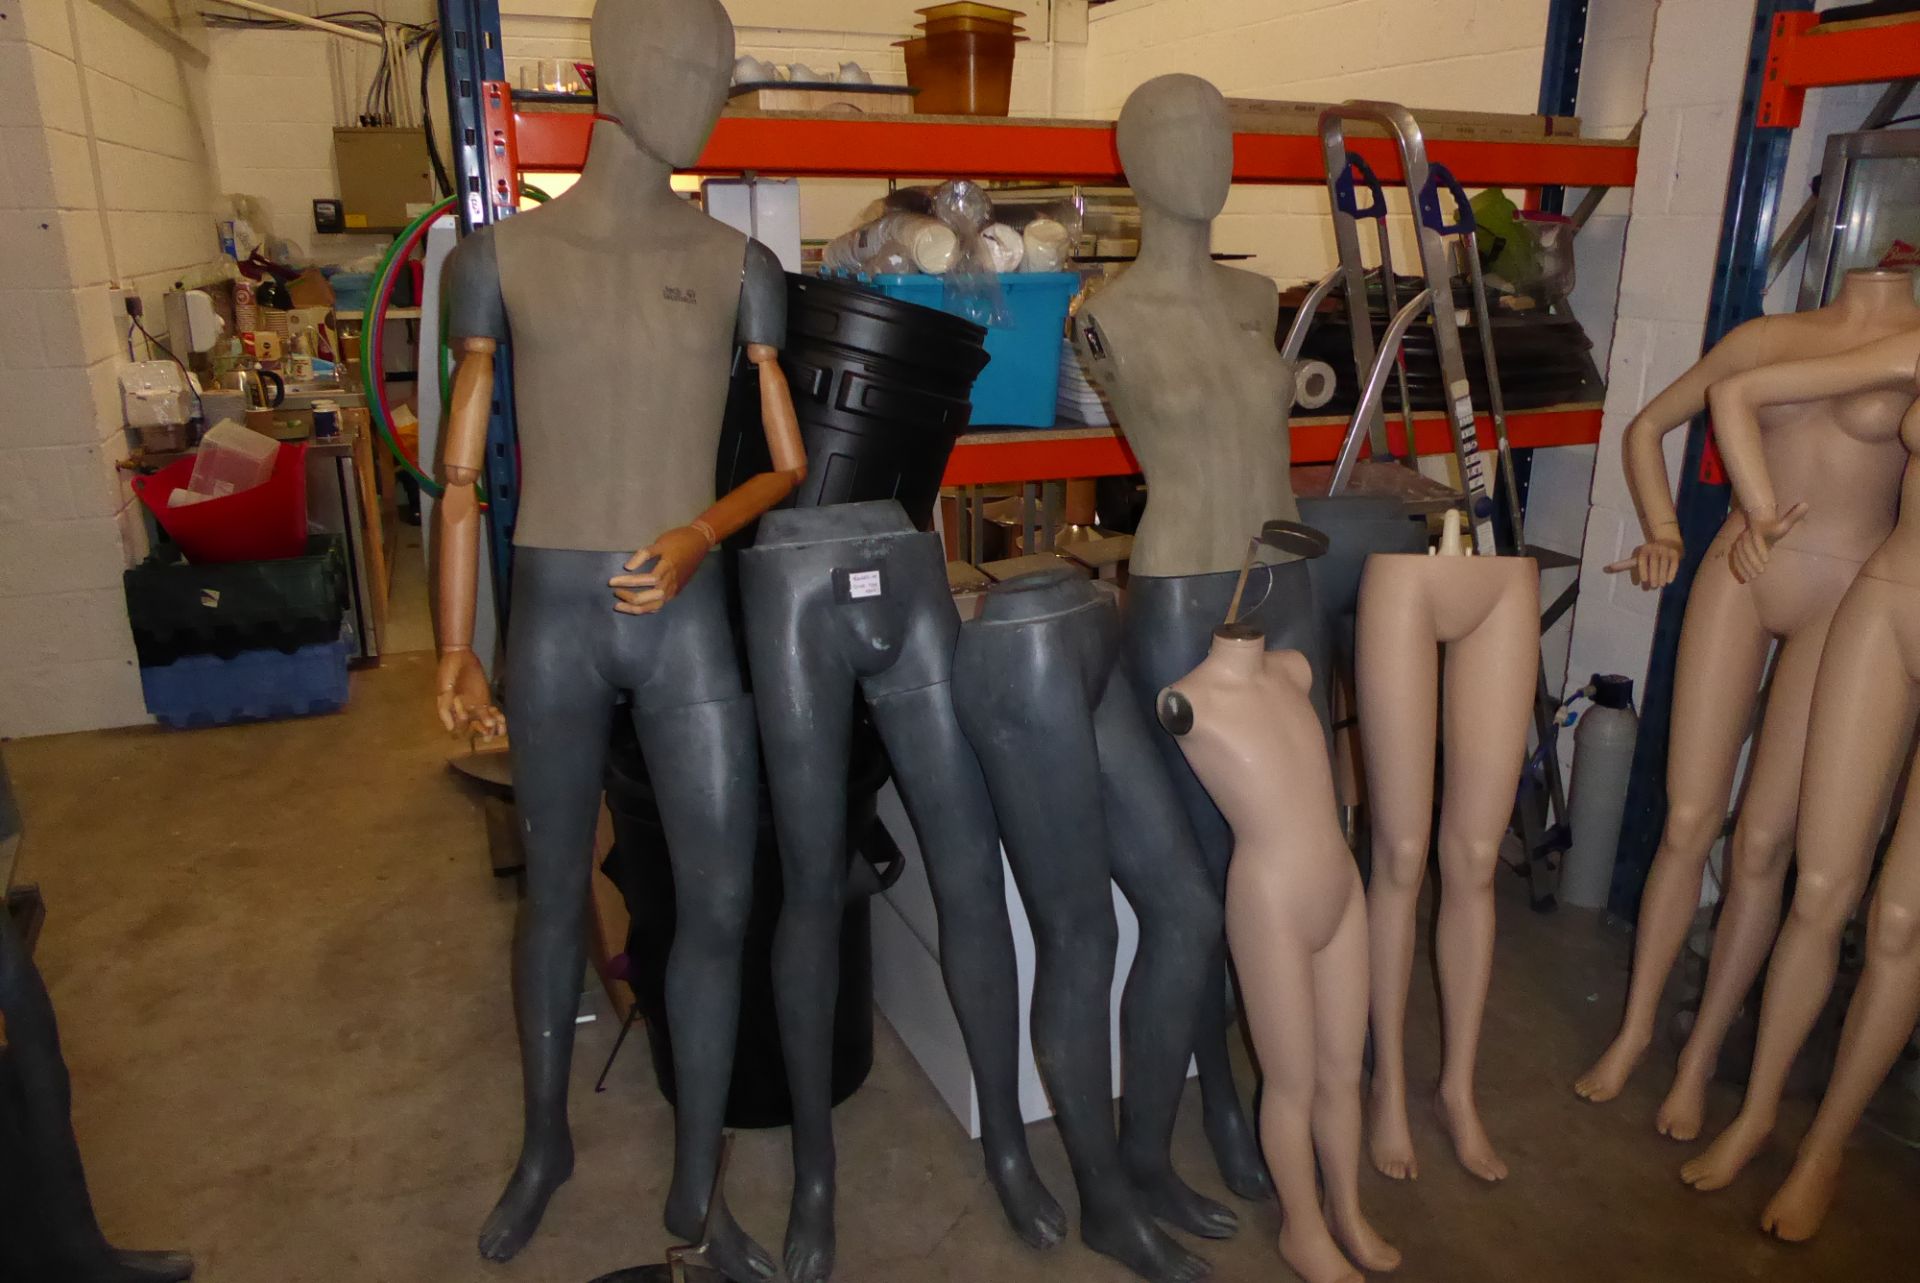 * Mannequin selection; 1x male, 1x child, plus 4 legs, partial female and other parts.